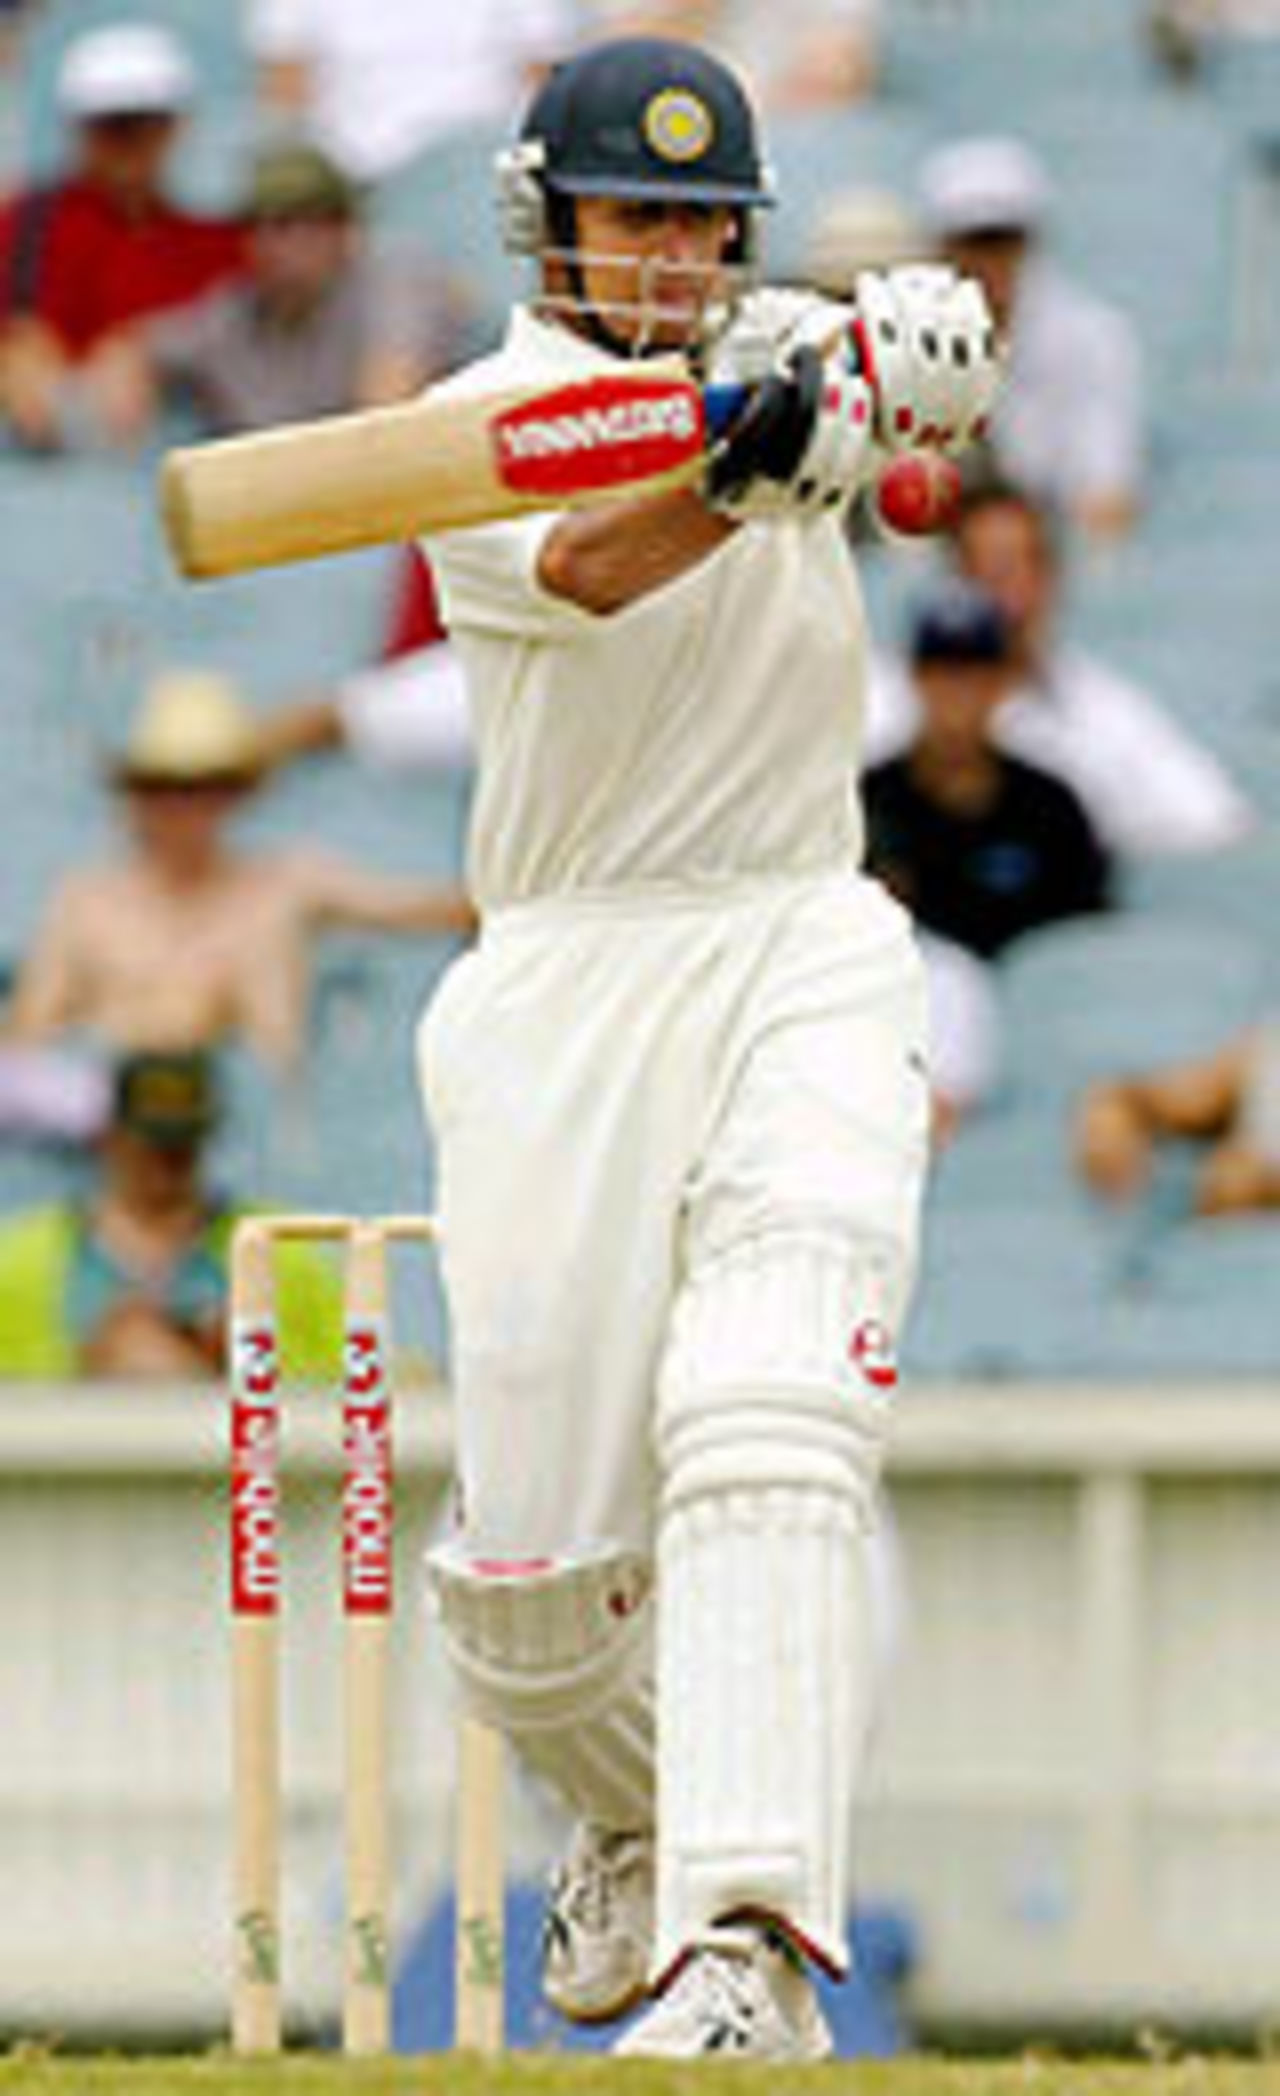 Rahul Dravid pulls on his way to 92, Australia v India, 3rd Test, Melbourne, 4th day, December 29, 2003